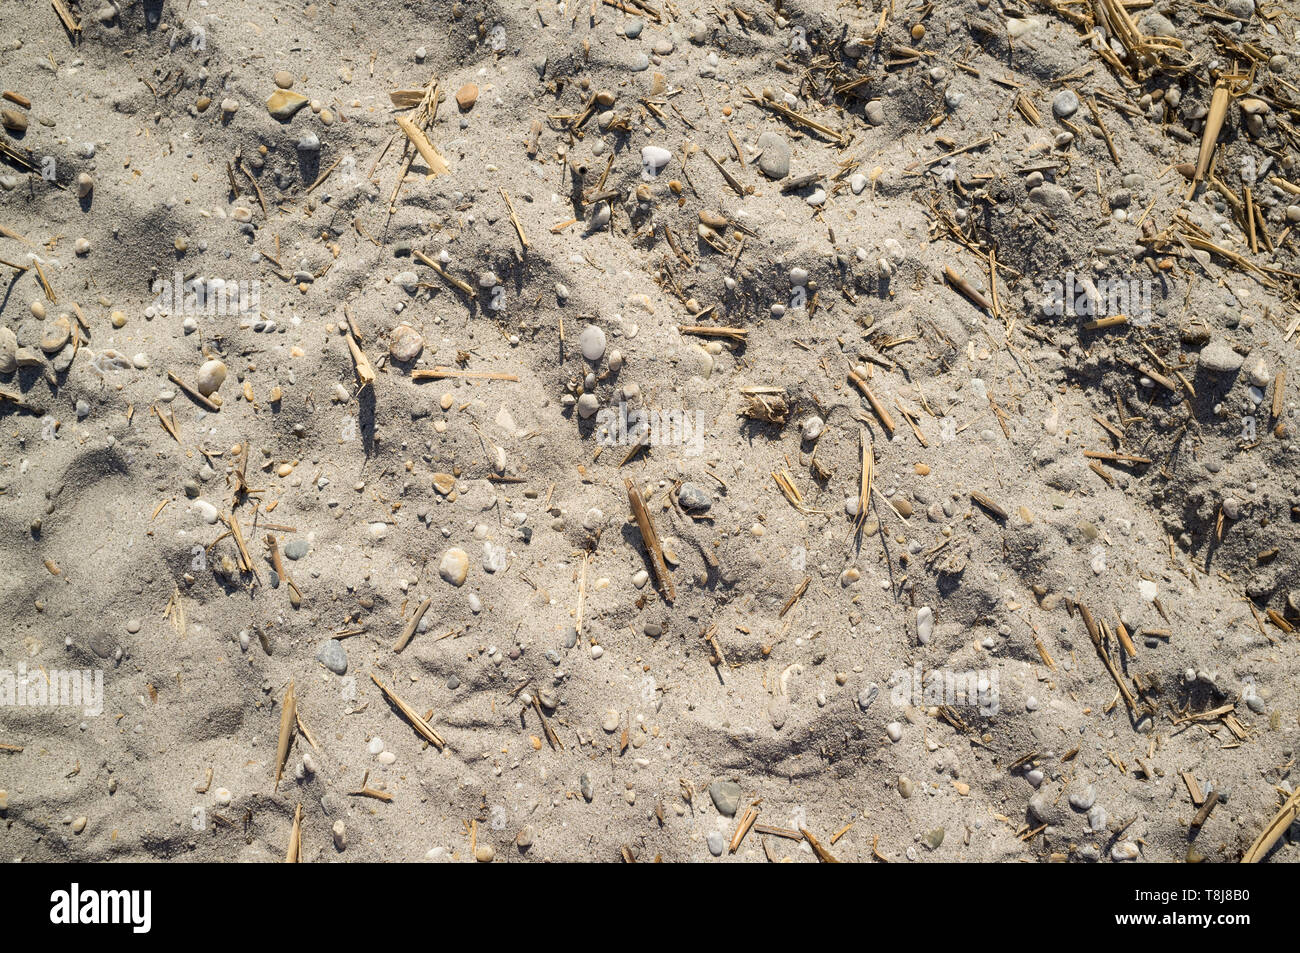 Texture of Lakeside Sand with Small Stones Pieces of Wood and Human Footprints Stock Photo